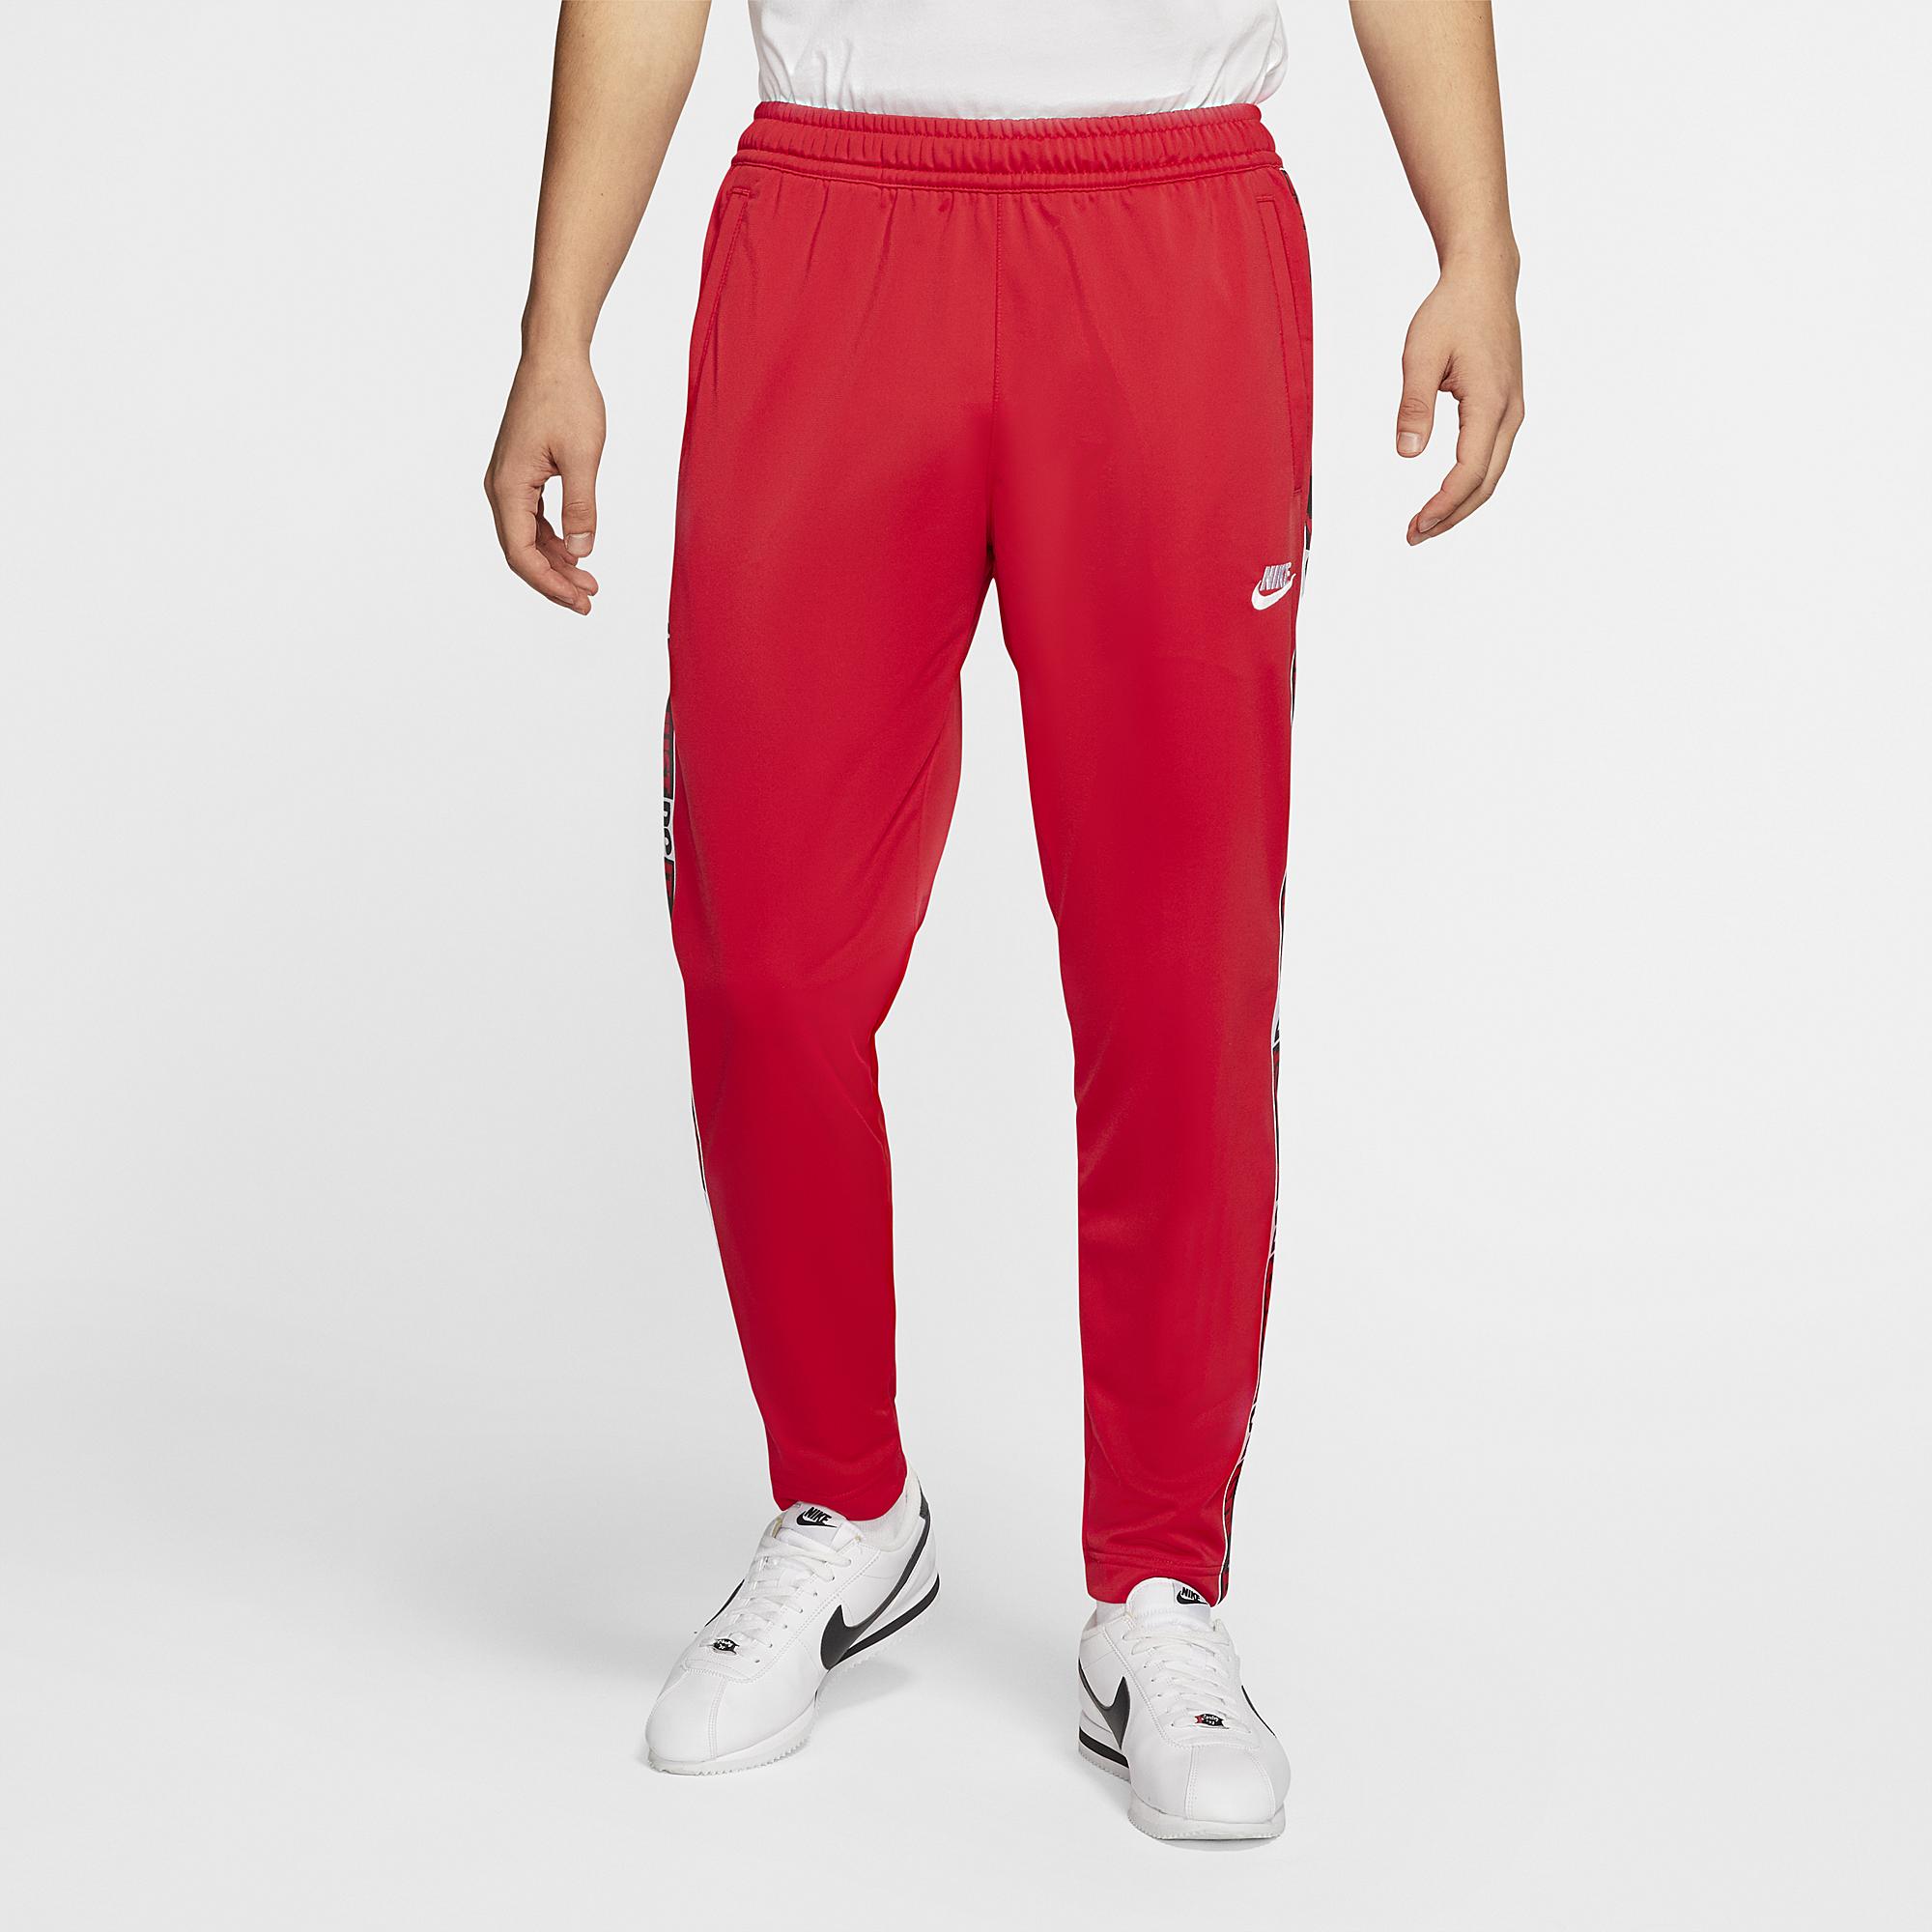 Nike Synthetic Jdi Tape Pants in University Red (Red) for Men - Save 13 ...